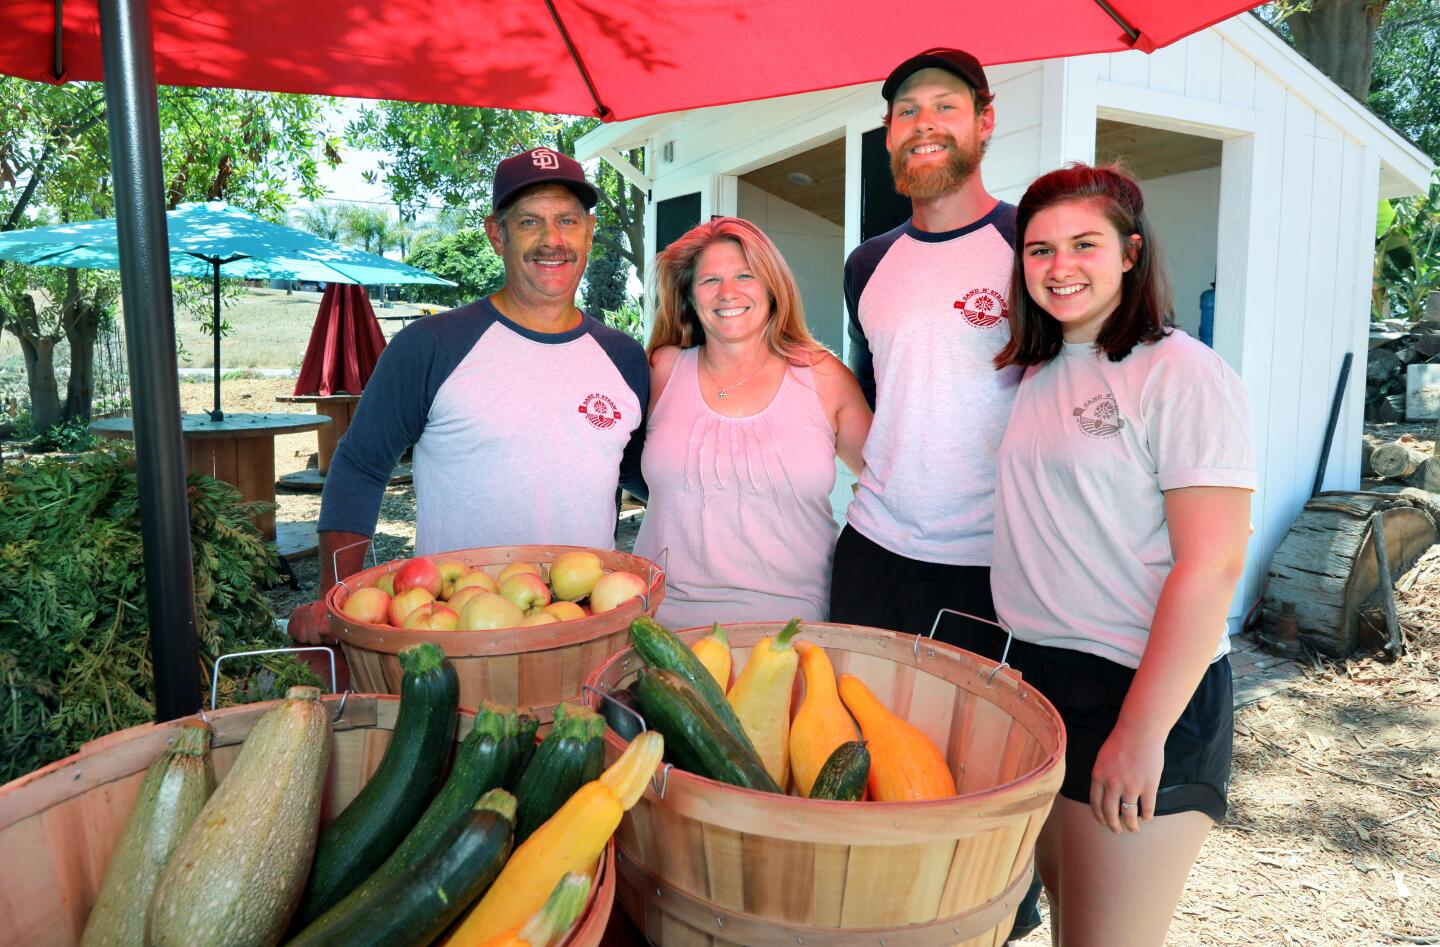 Richard and April Viles, owners of Sand N' Straw Community Farm, at left, with their son Jonathan Viles and his wife Jenna, at right, who help out at the farm. In the foreground are vegetables grown there